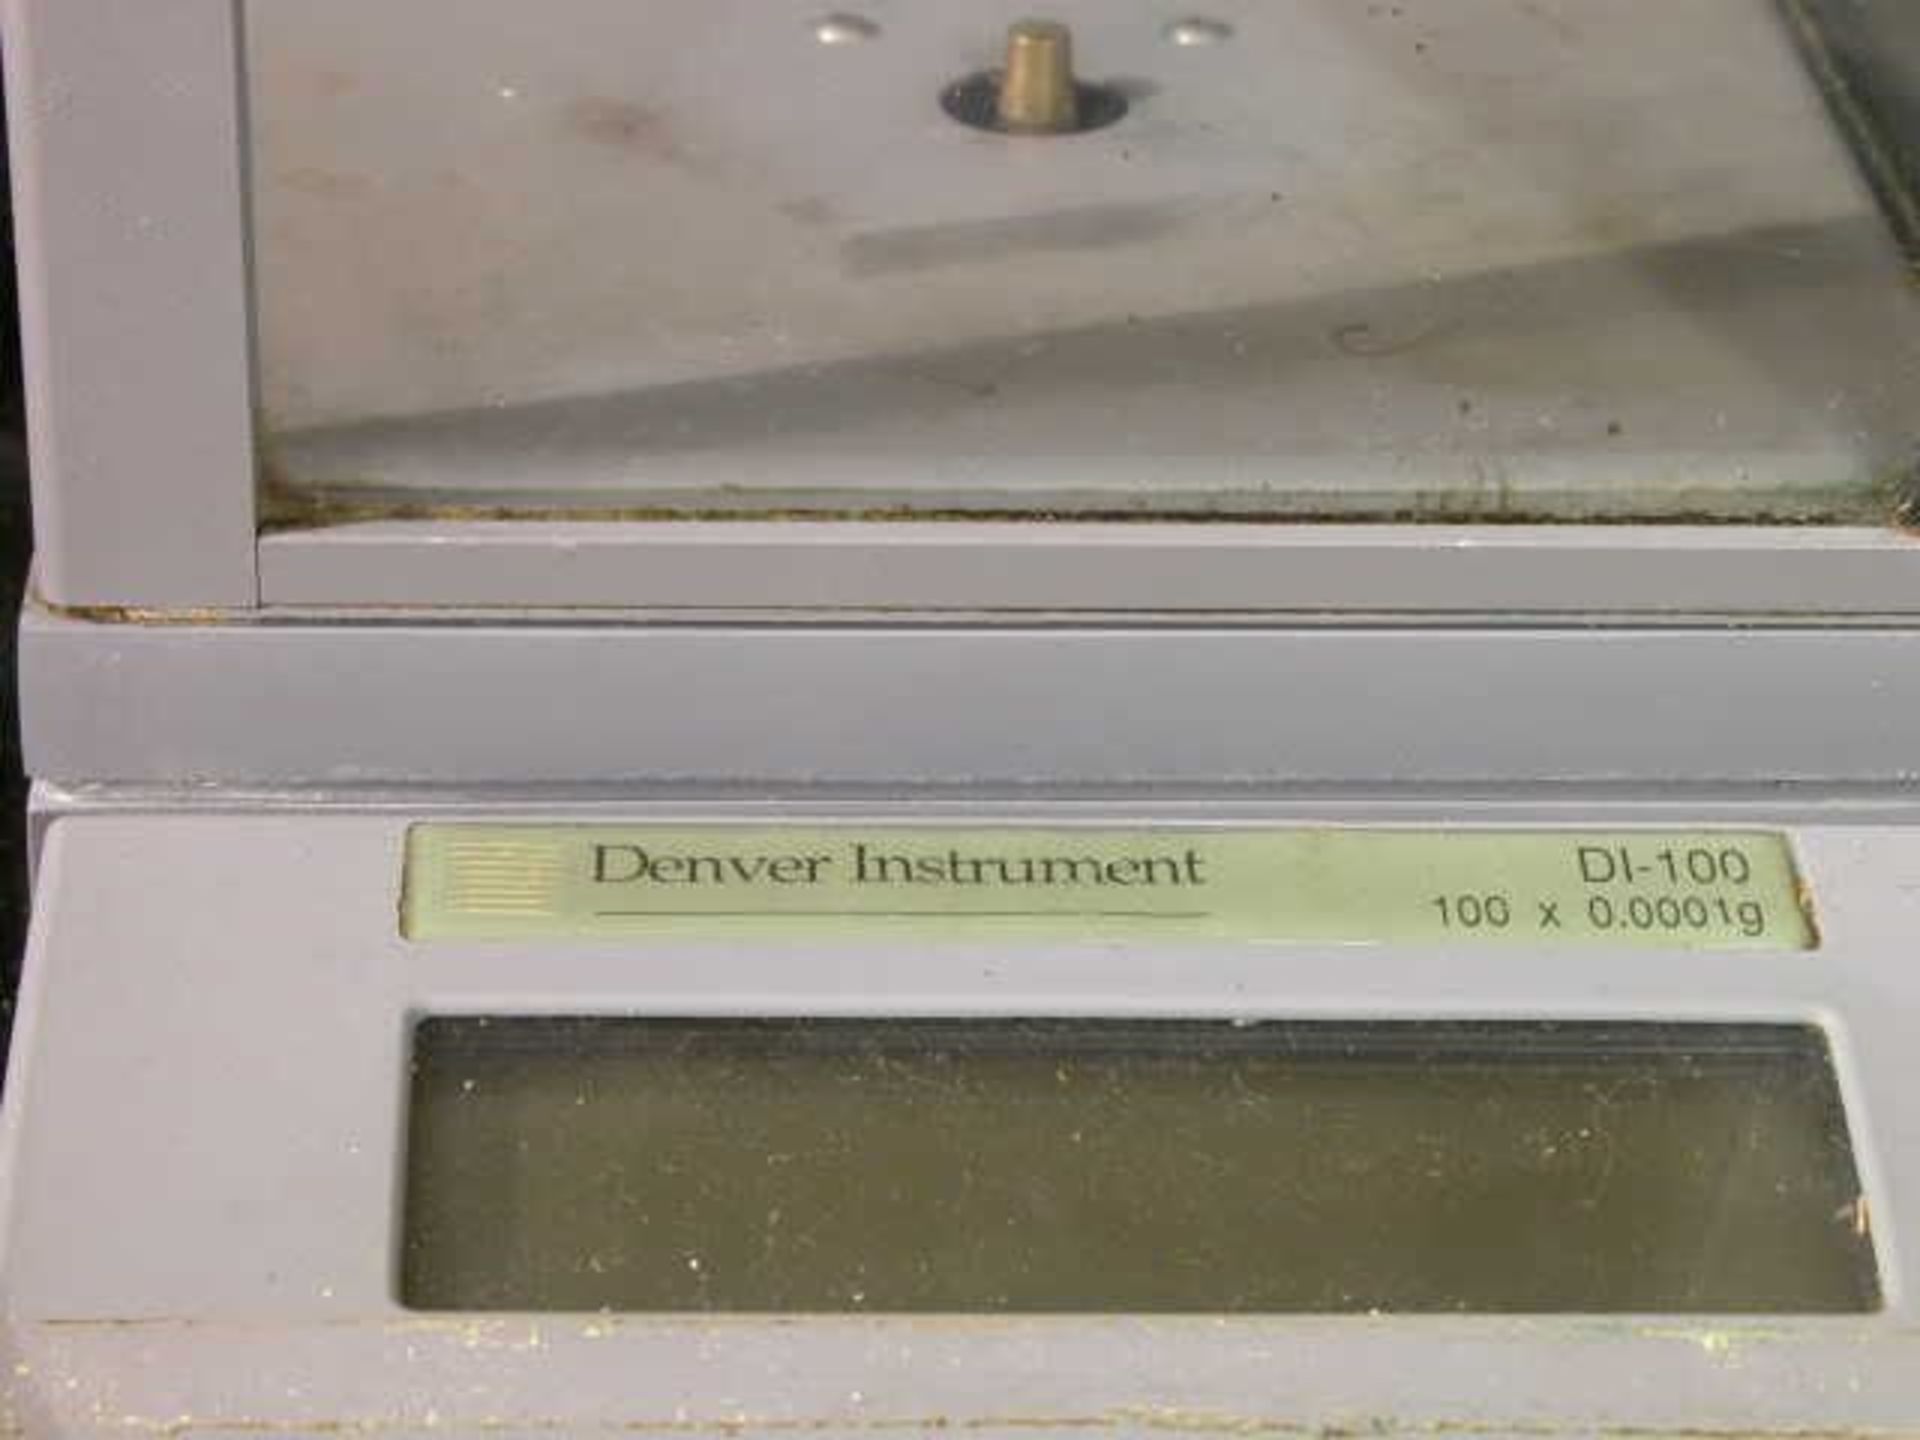 Denver Instruments DI-100 Digital Balance Scale (For Parts Not Working), Qty 1, 320836199790 - Image 2 of 5